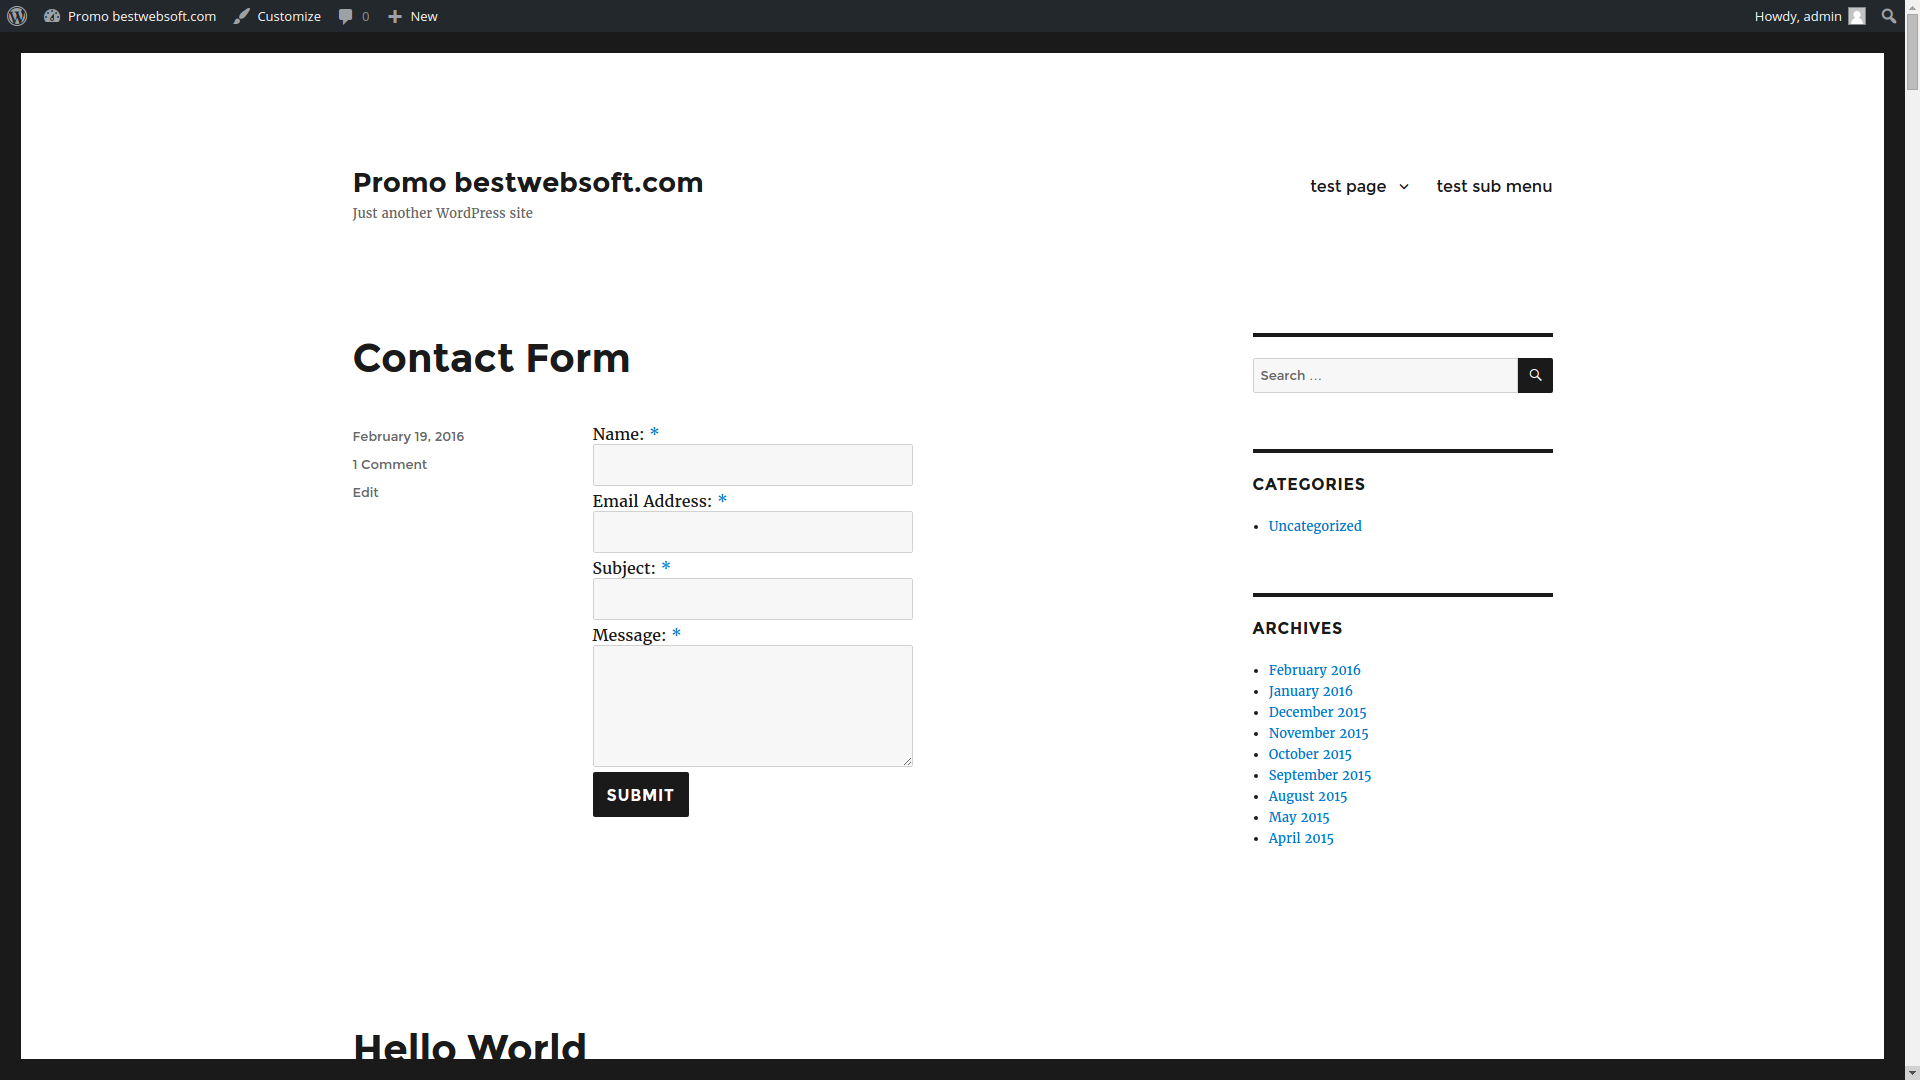 Contact Form displaying.